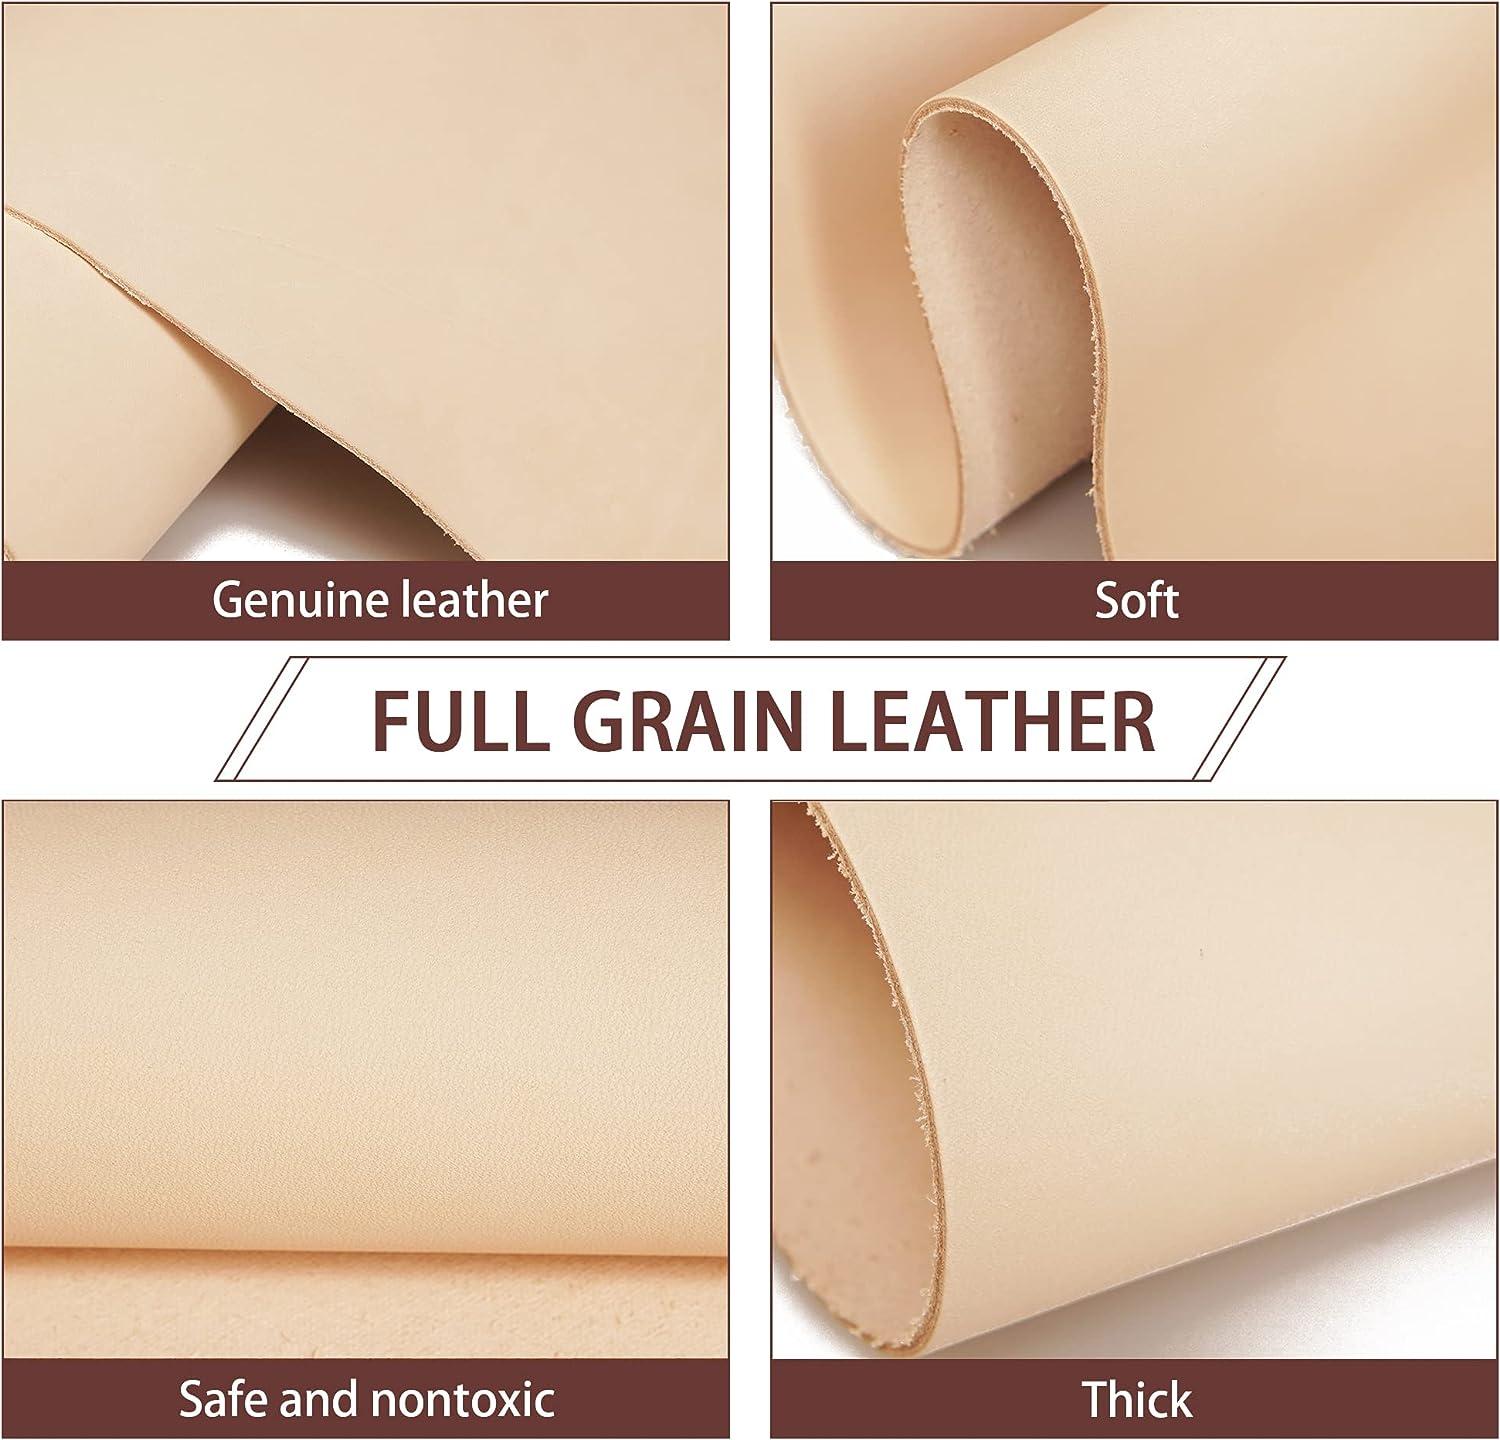 Yoving Thick Leather Sheets for Crafts Tooling Genuine Leather Square Leather Fabric Material 2mm Full Grain Cow Hide Leather Pieces for Crafts Sewing